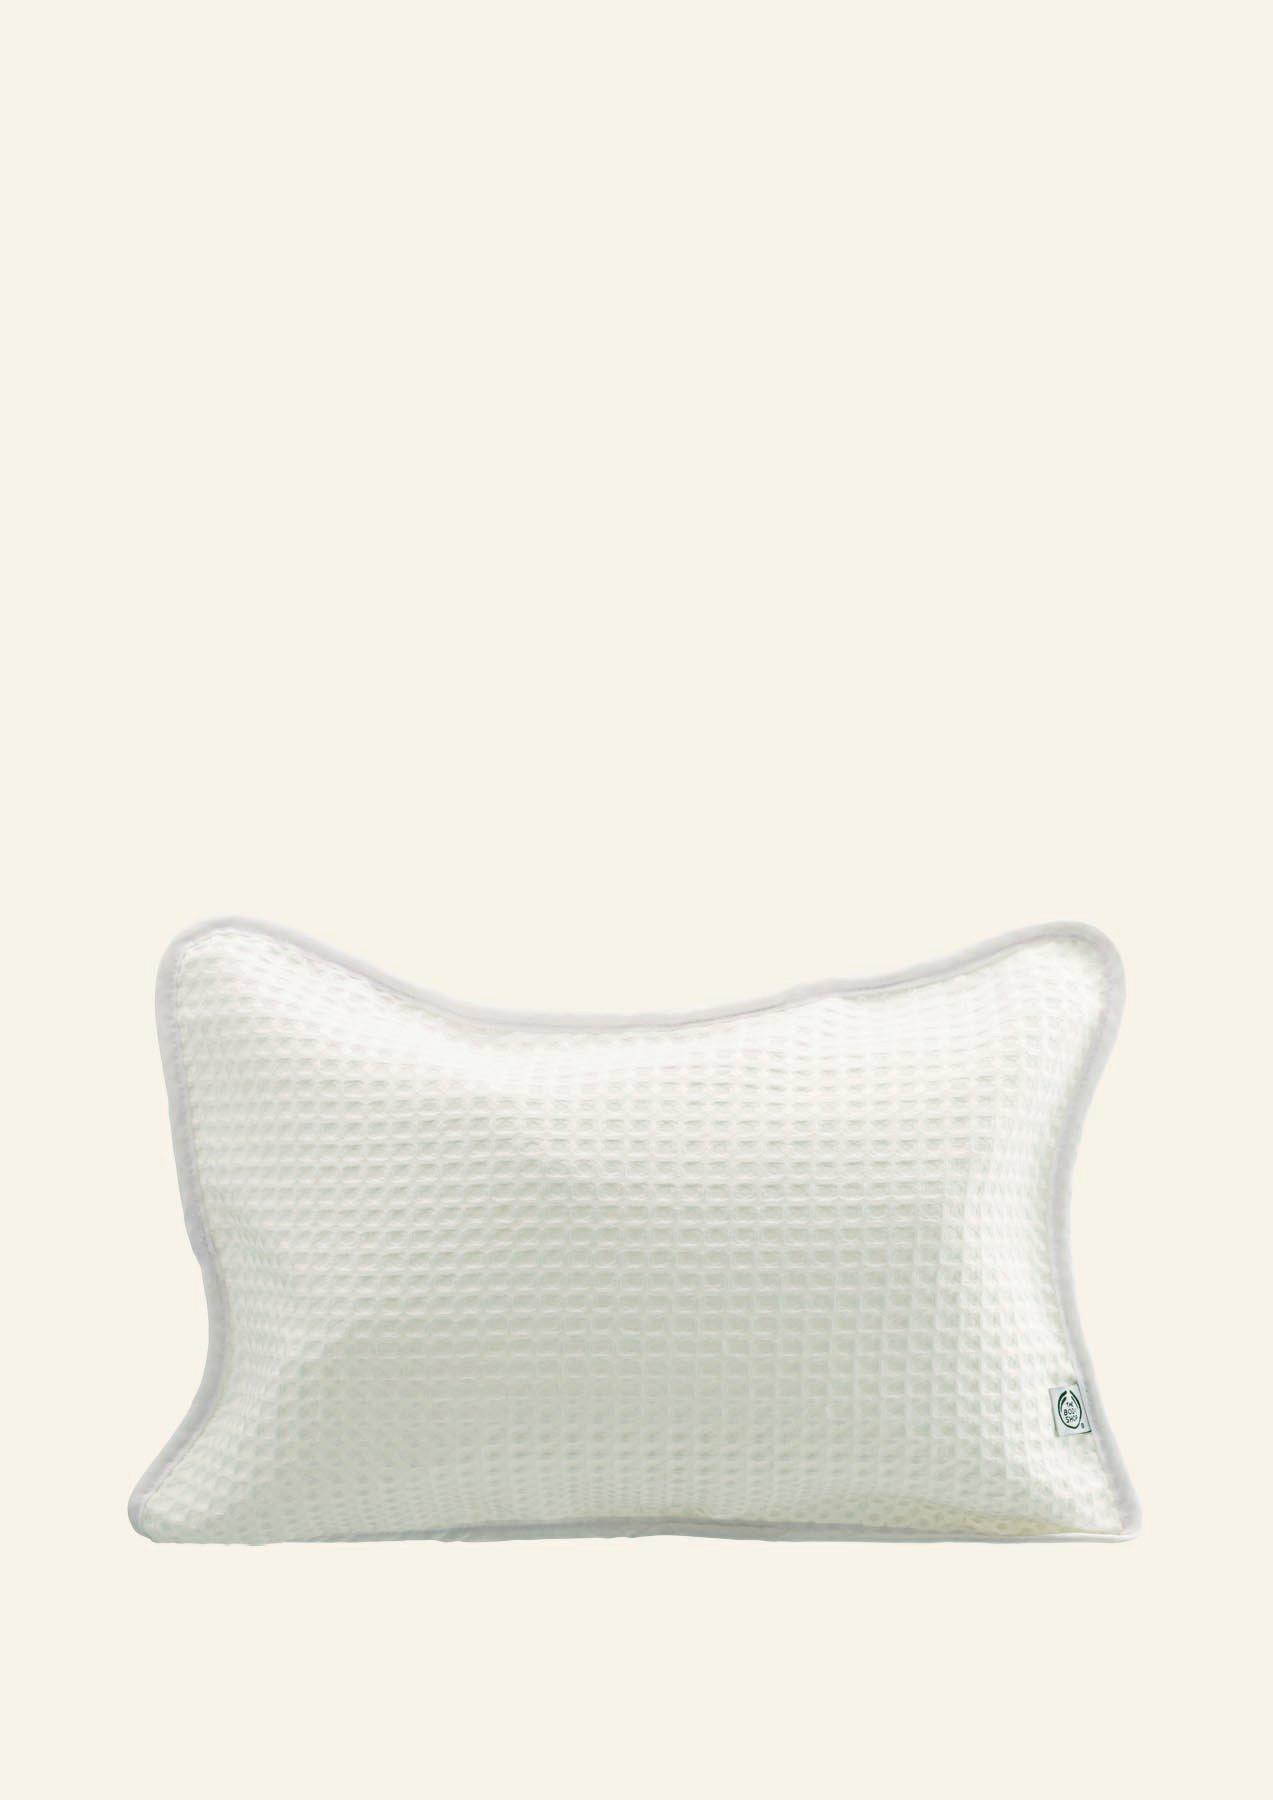 Inflatable Bath Pillow | The Body Shop®